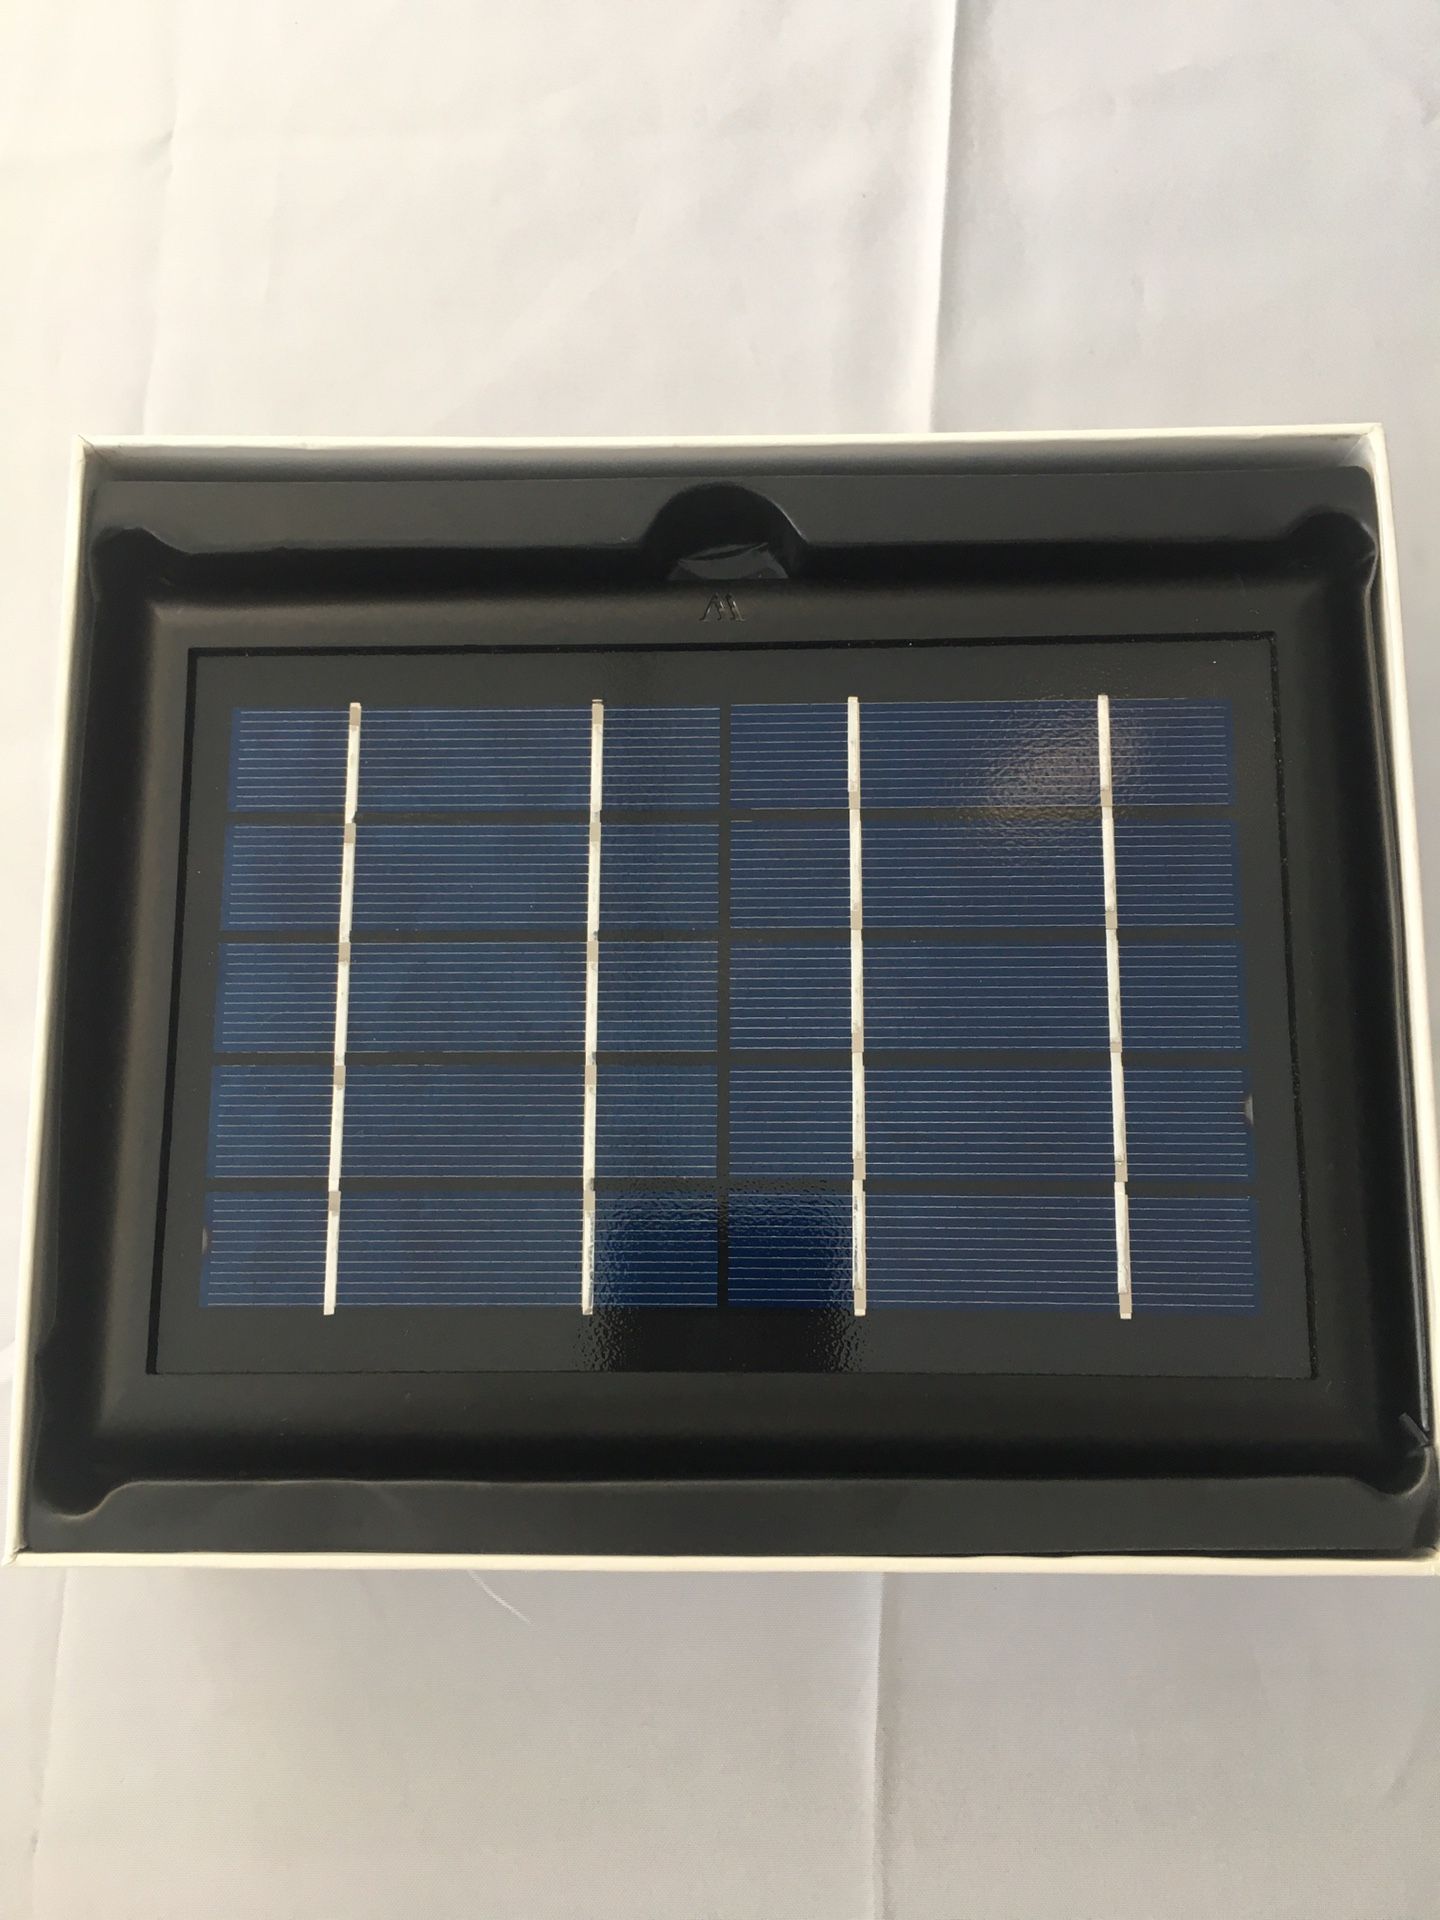 Solar panel for ARLO ULTRA surveillance camera with 13.1’ feet of cable